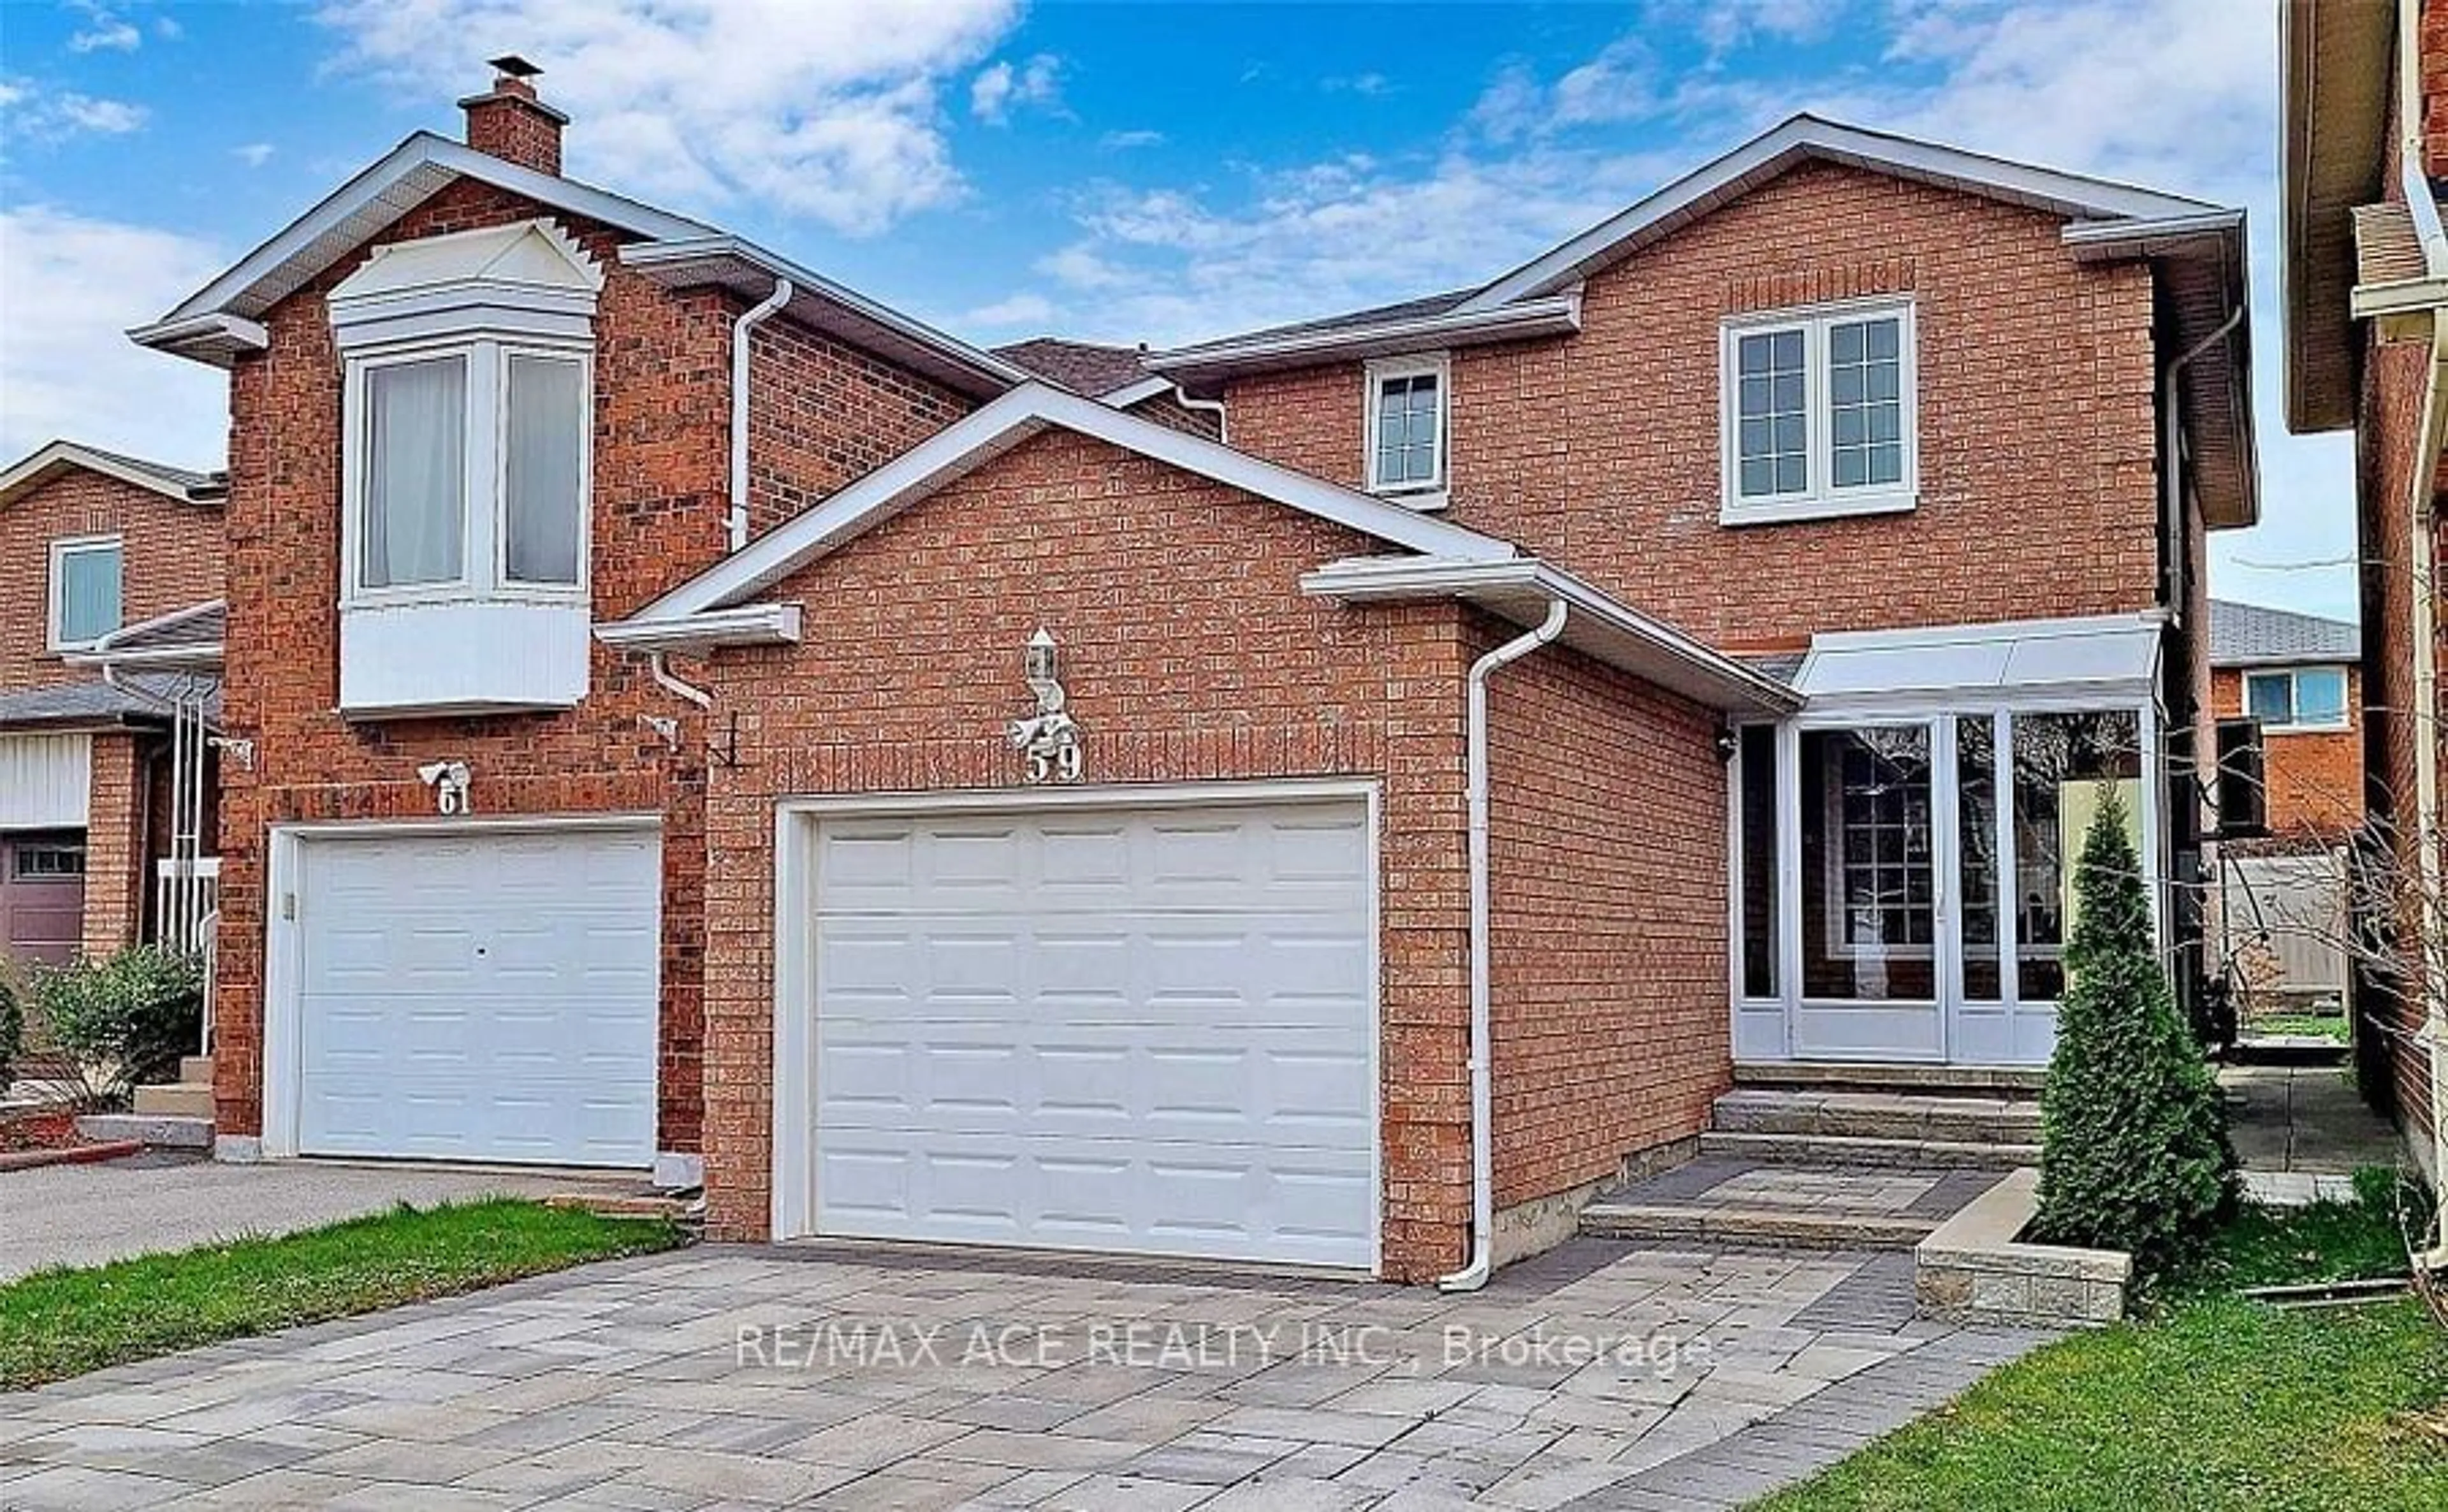 Home with brick exterior material for 59 White Blvd, Vaughan Ontario L4J 5Z7